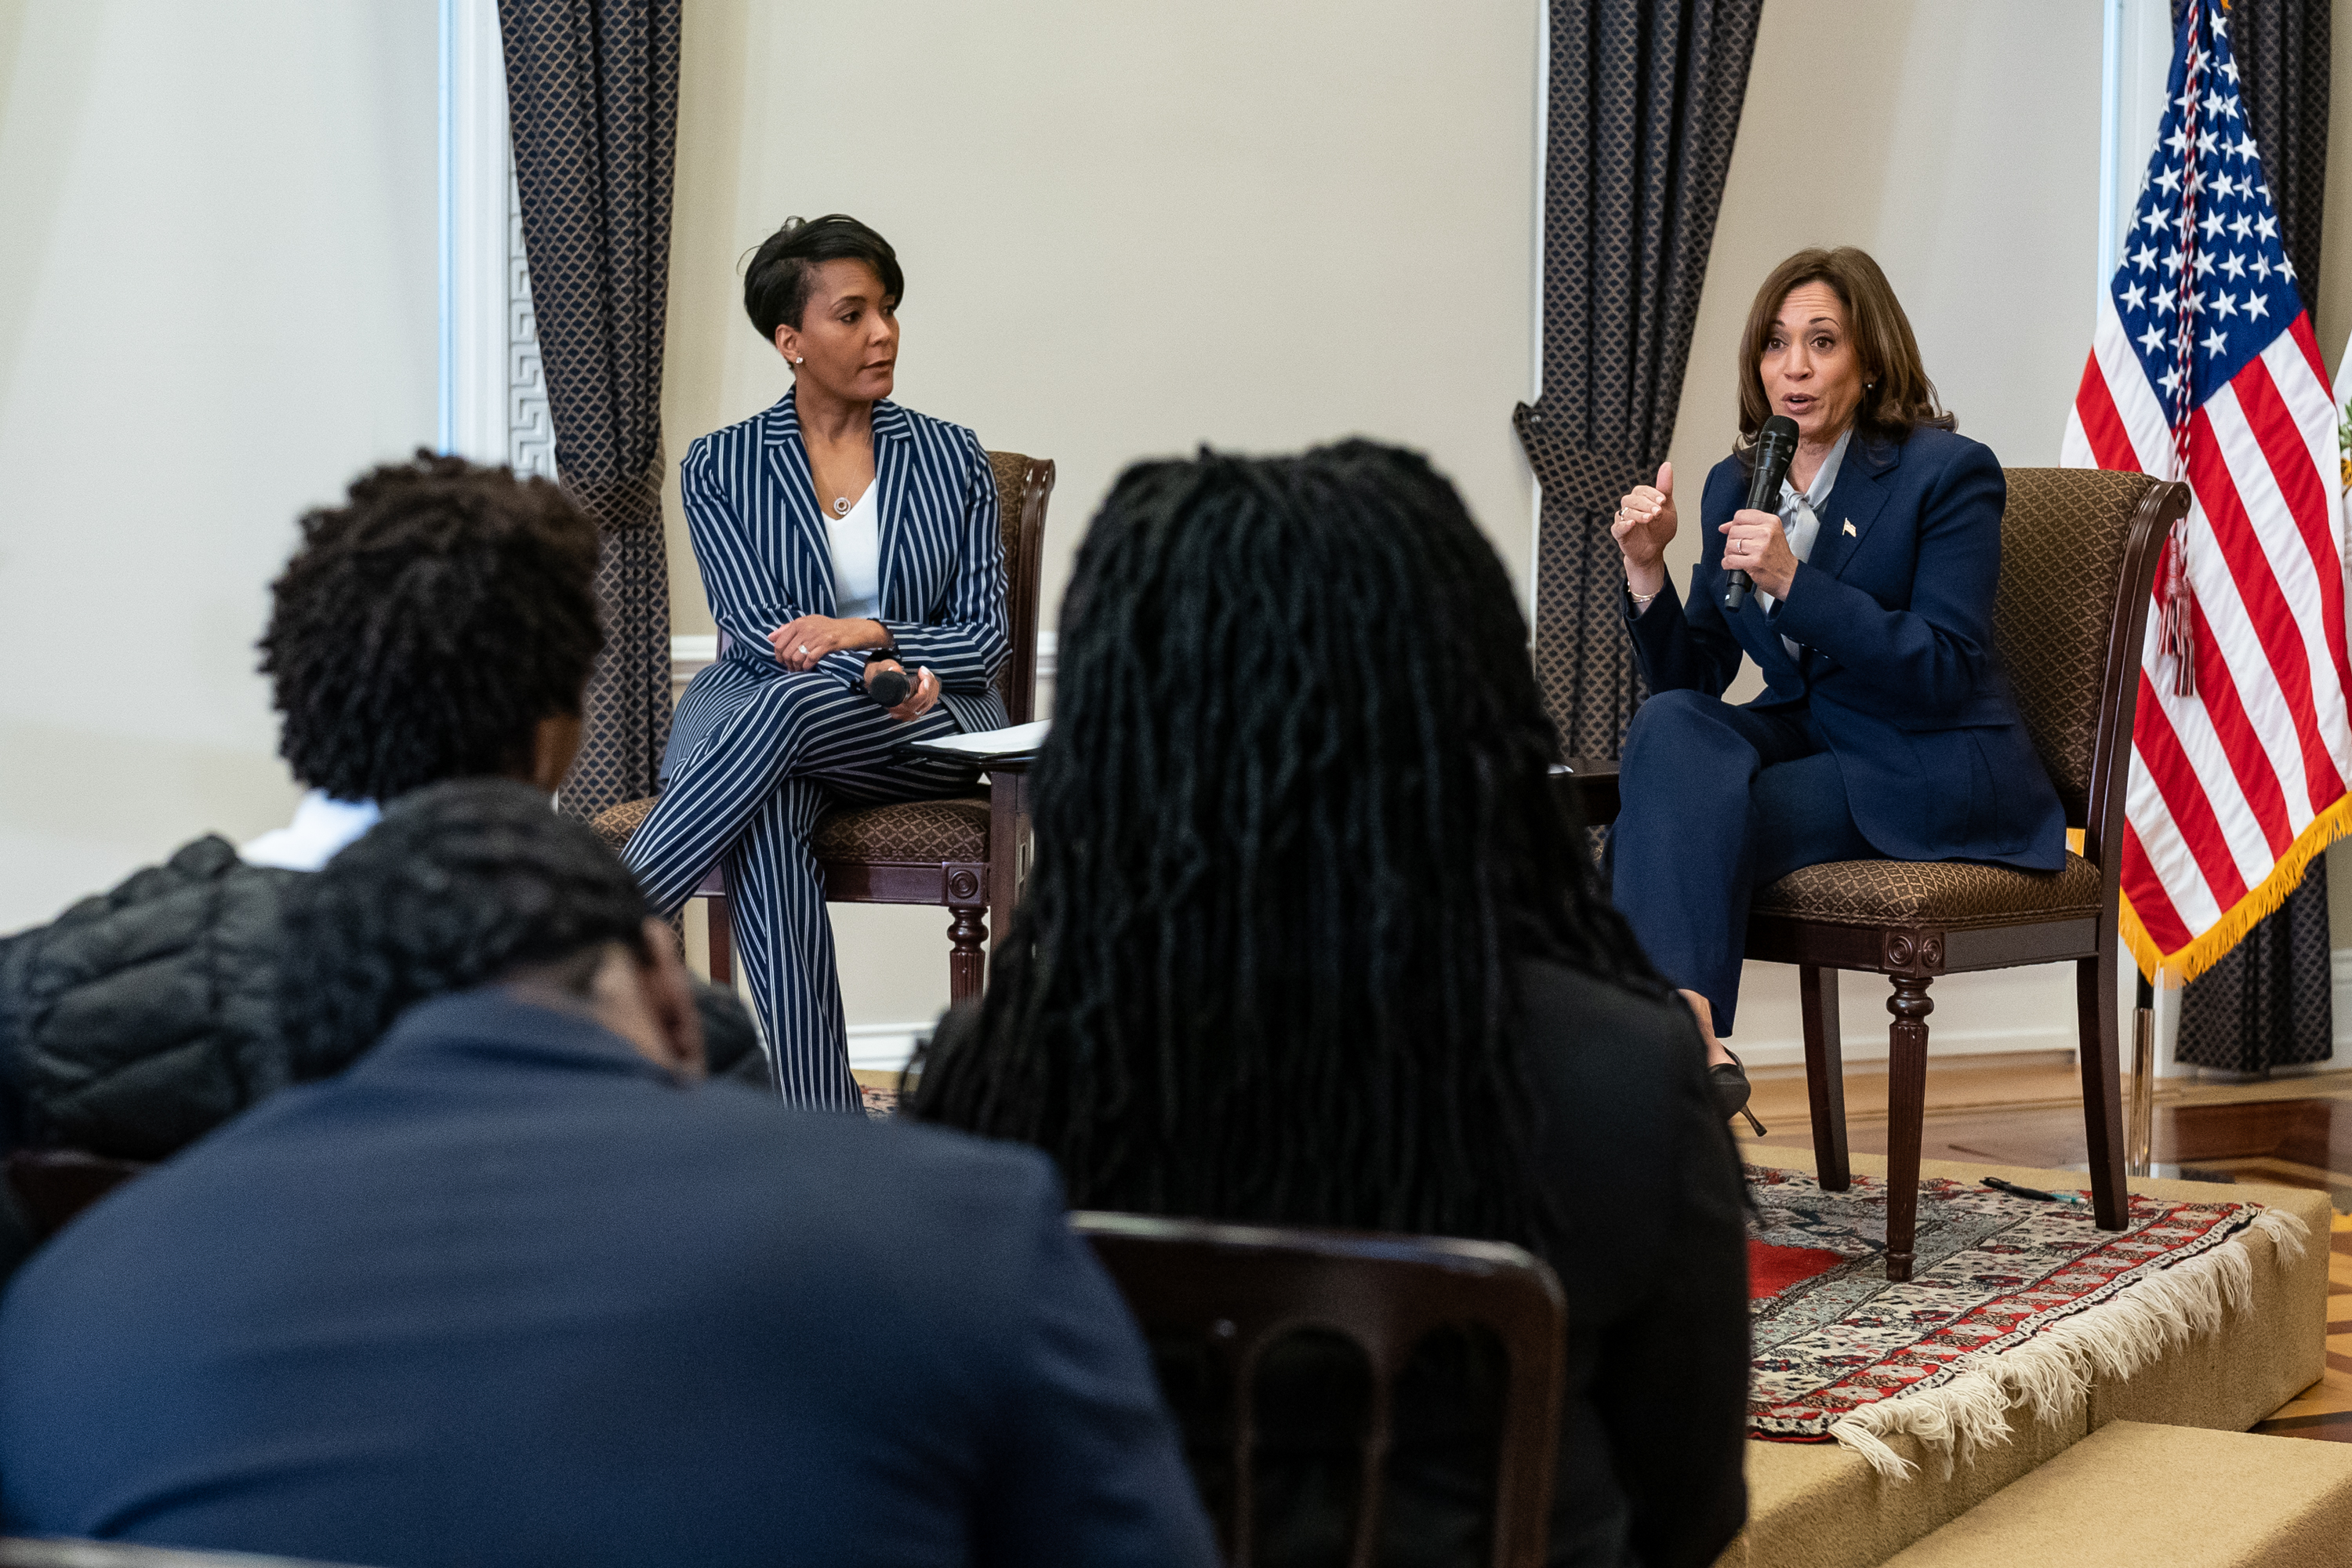 Senior Advisor for Public Engagement Keisha Lance Bottoms (left) and Vice President Kamala Harris (right) speak with over 40 HBCU students from around the country during White House briefing.